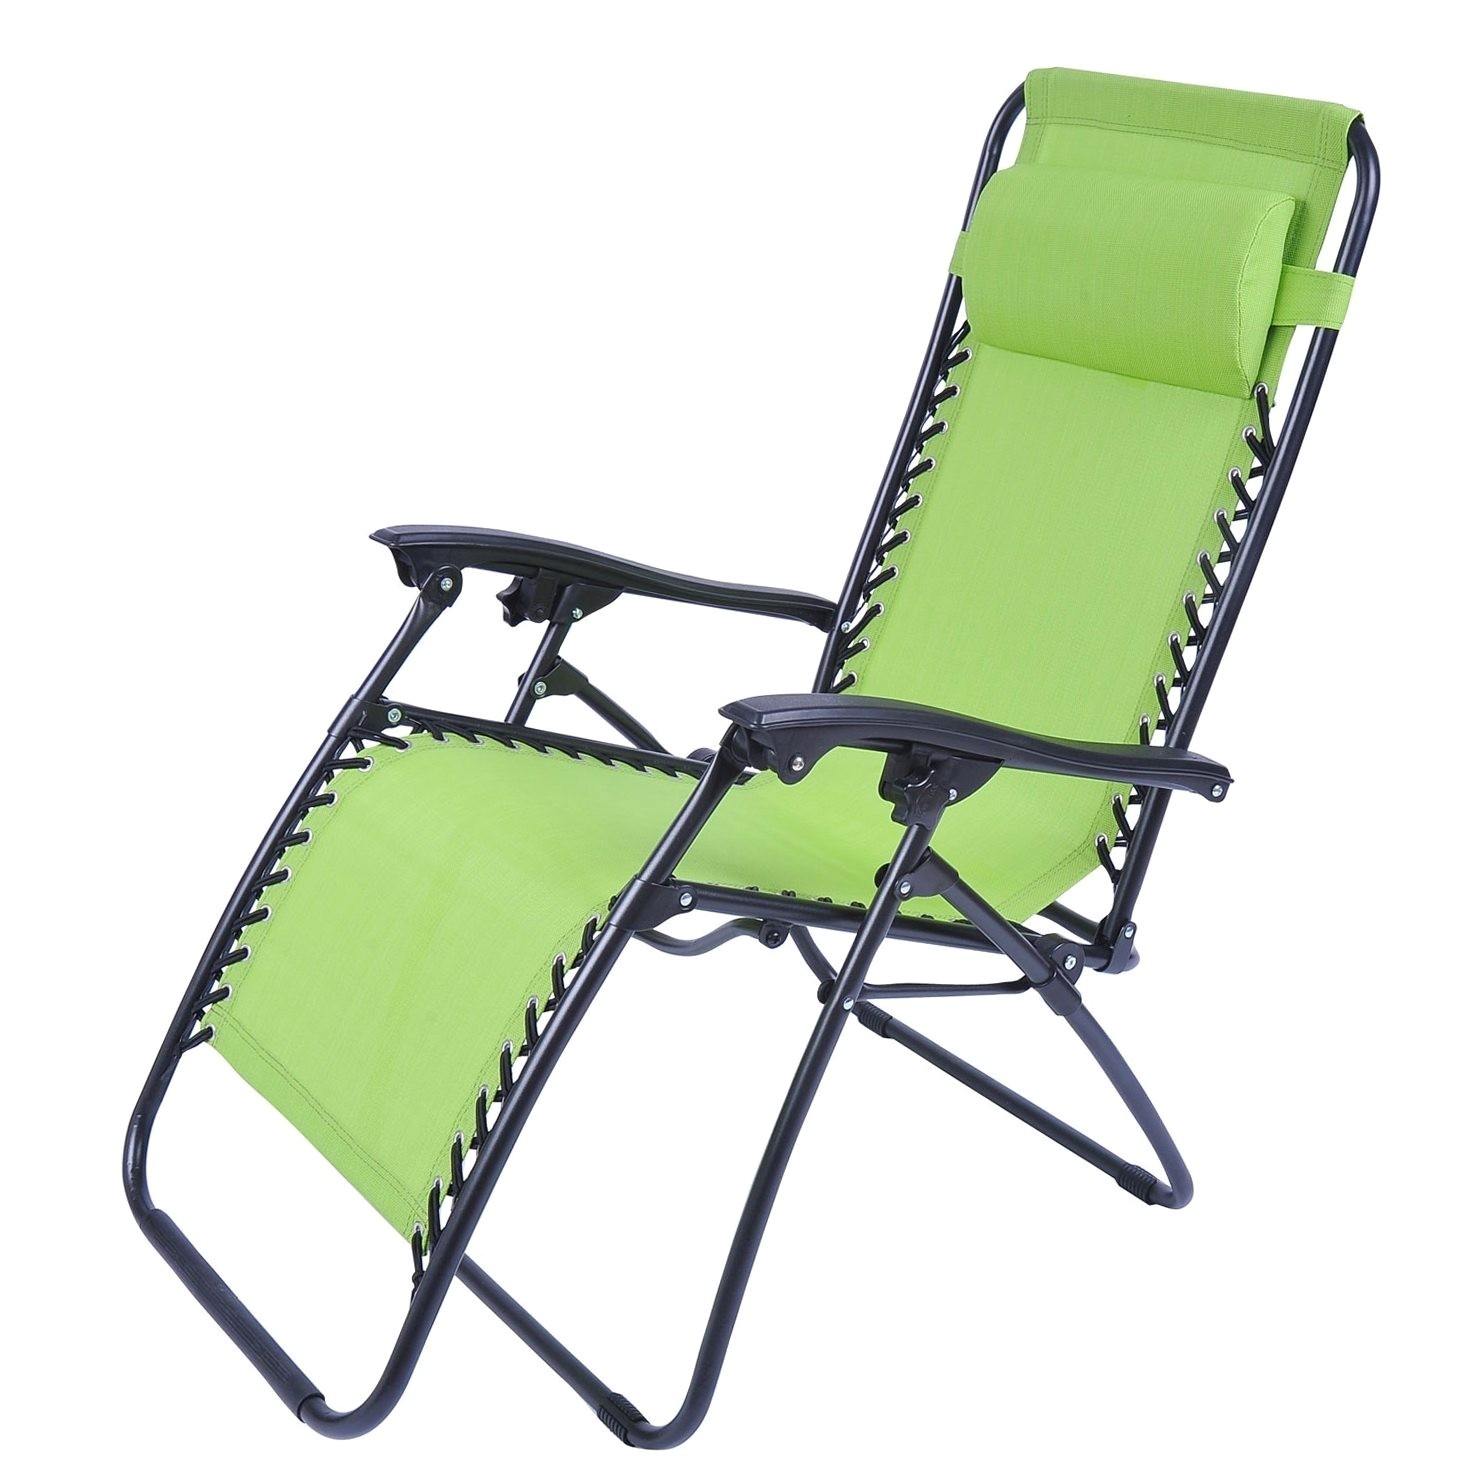 epic outdoor folding chairs target f39x about remodel modern small home remodel ideas with outdoor folding chairs target